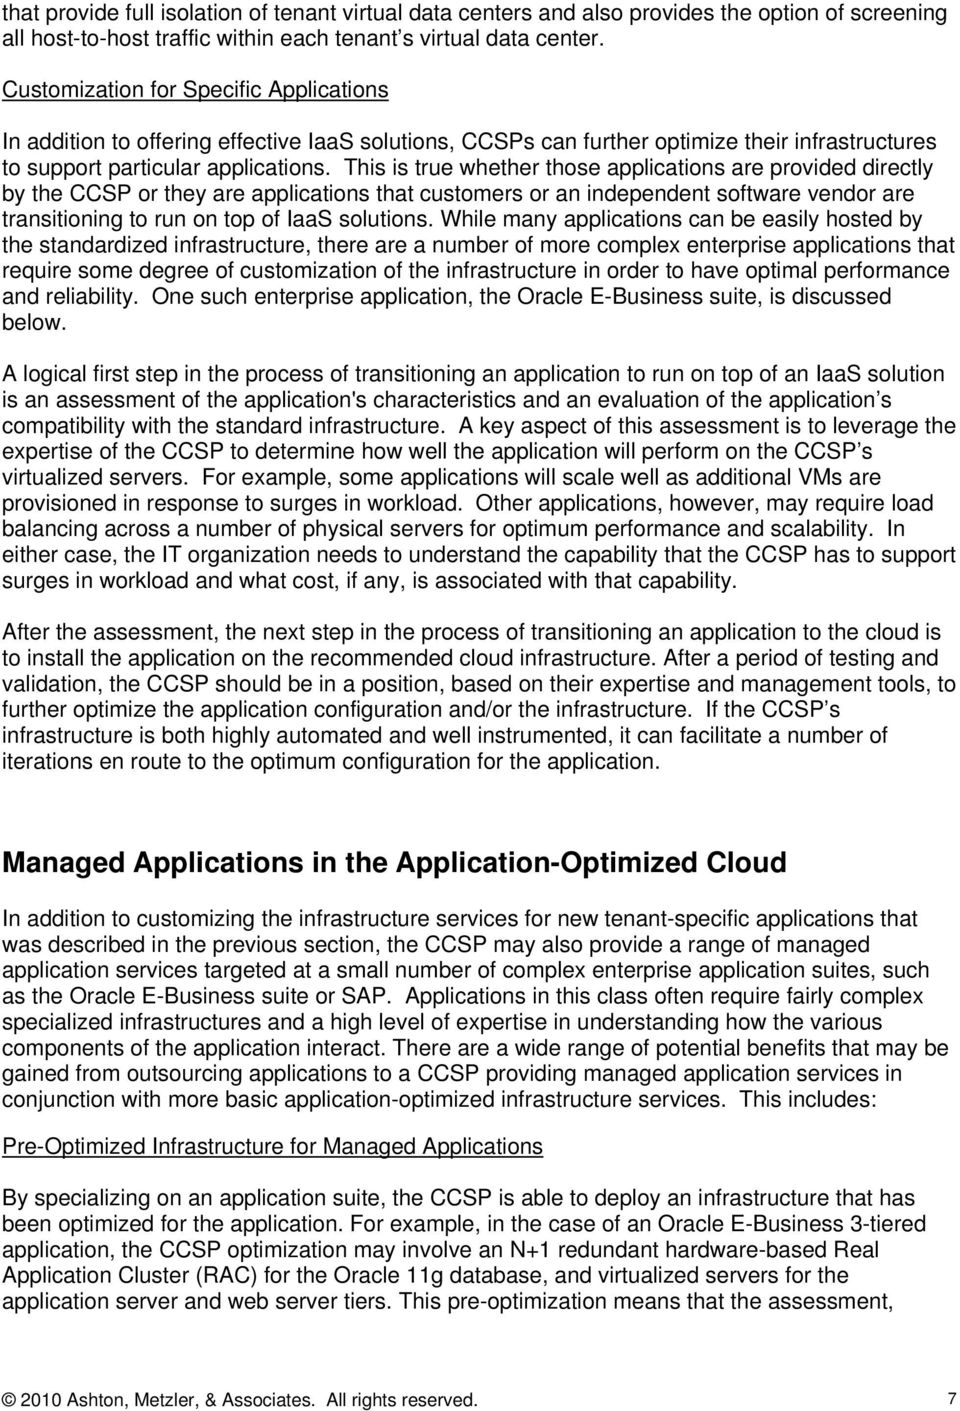 This is true whether those applications are provided directly by the CCSP or they are applications that customers or an independent software vendor are transitioning to run on top of IaaS solutions.